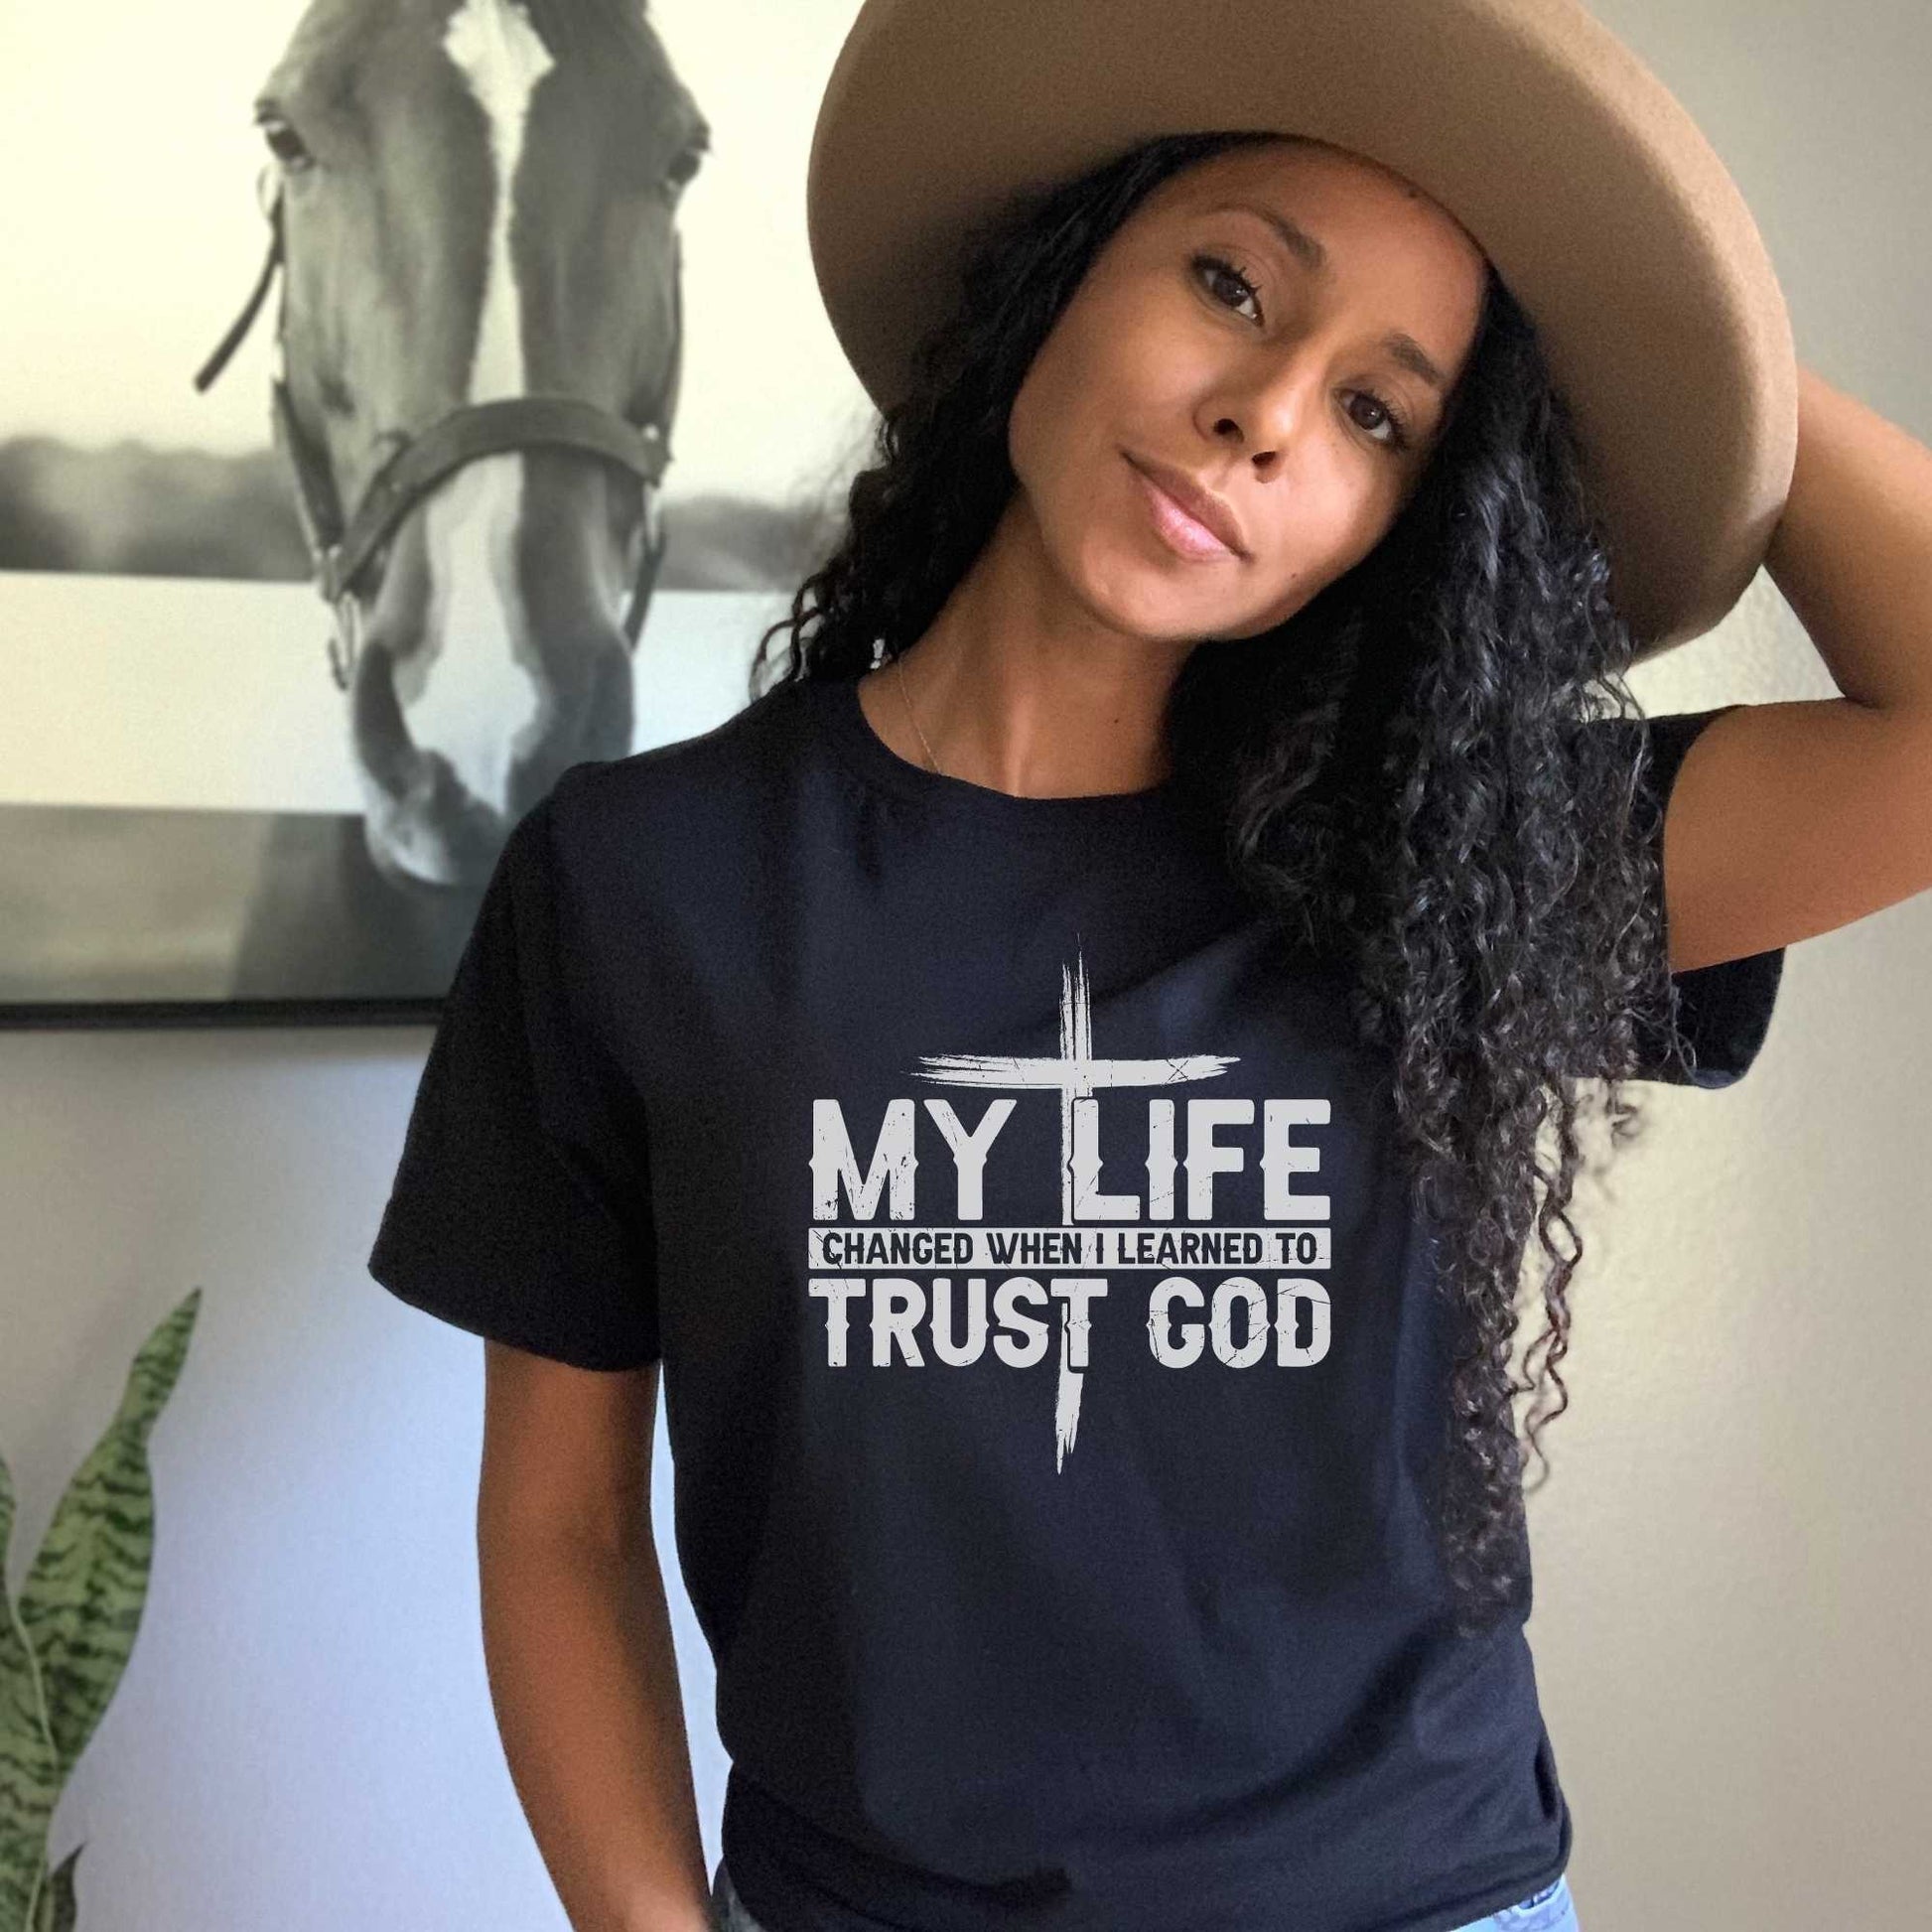 My Life Changed When I Learned to Trust God, Christian Shirts for Women